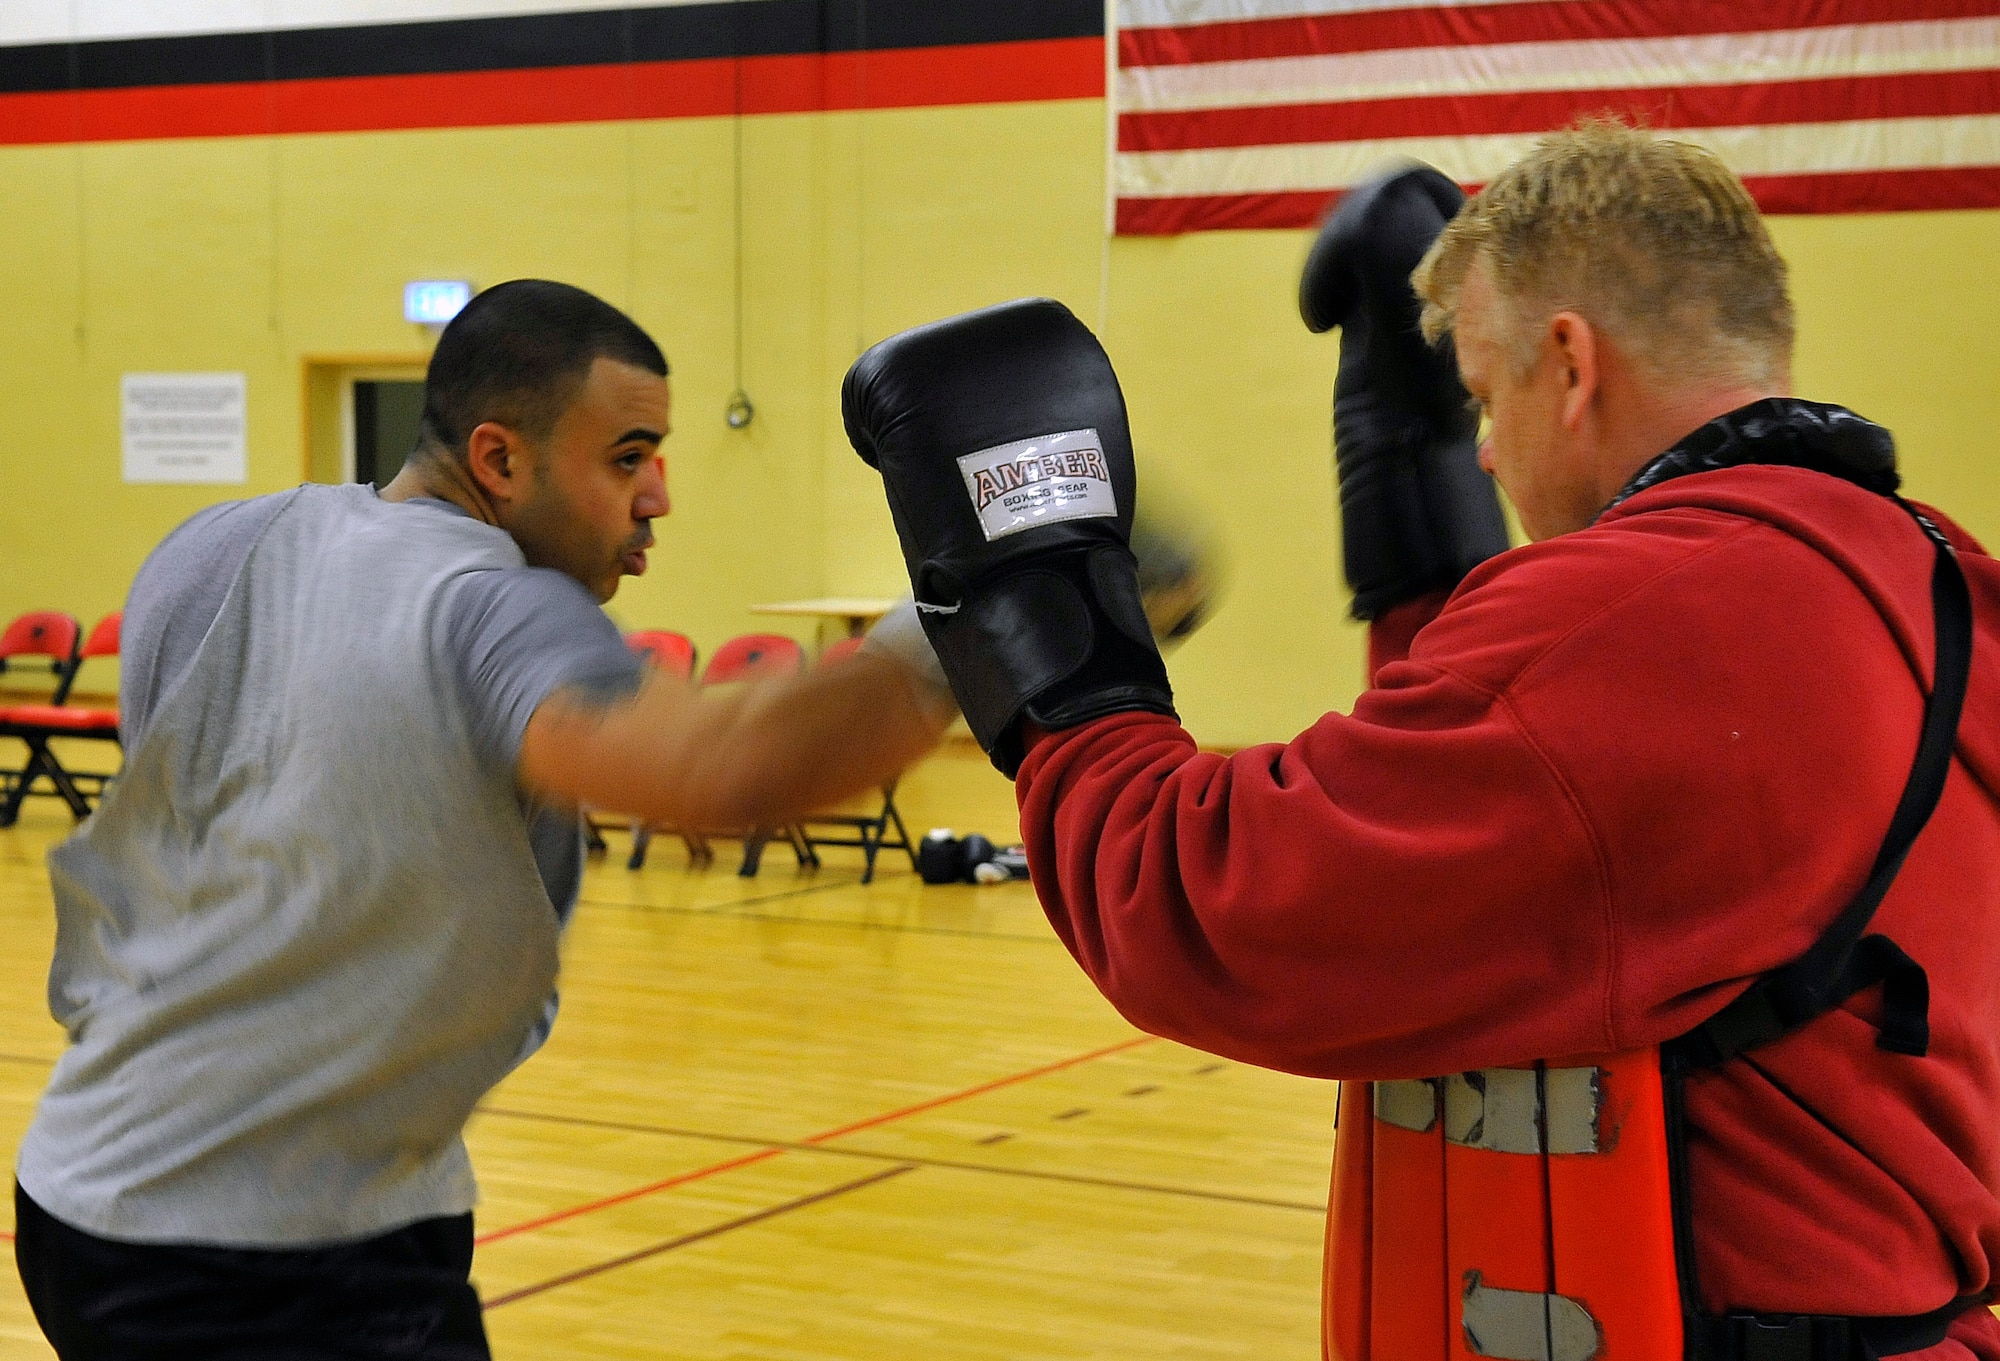 Staff Sgt. David Meredith, 721st Aerial Port Squadron security manager, spars against James Scullion, Celtic Warrior Boxing Club coach, during practice, Feb. 27, 2013, Miesau Army Depot, Germany. The combination of cardio, cross training and strength training makes boxing a great alternate workout for any fitness level. (U.S. Air Force photo/Airman 1st Class Trevor Rhynes)